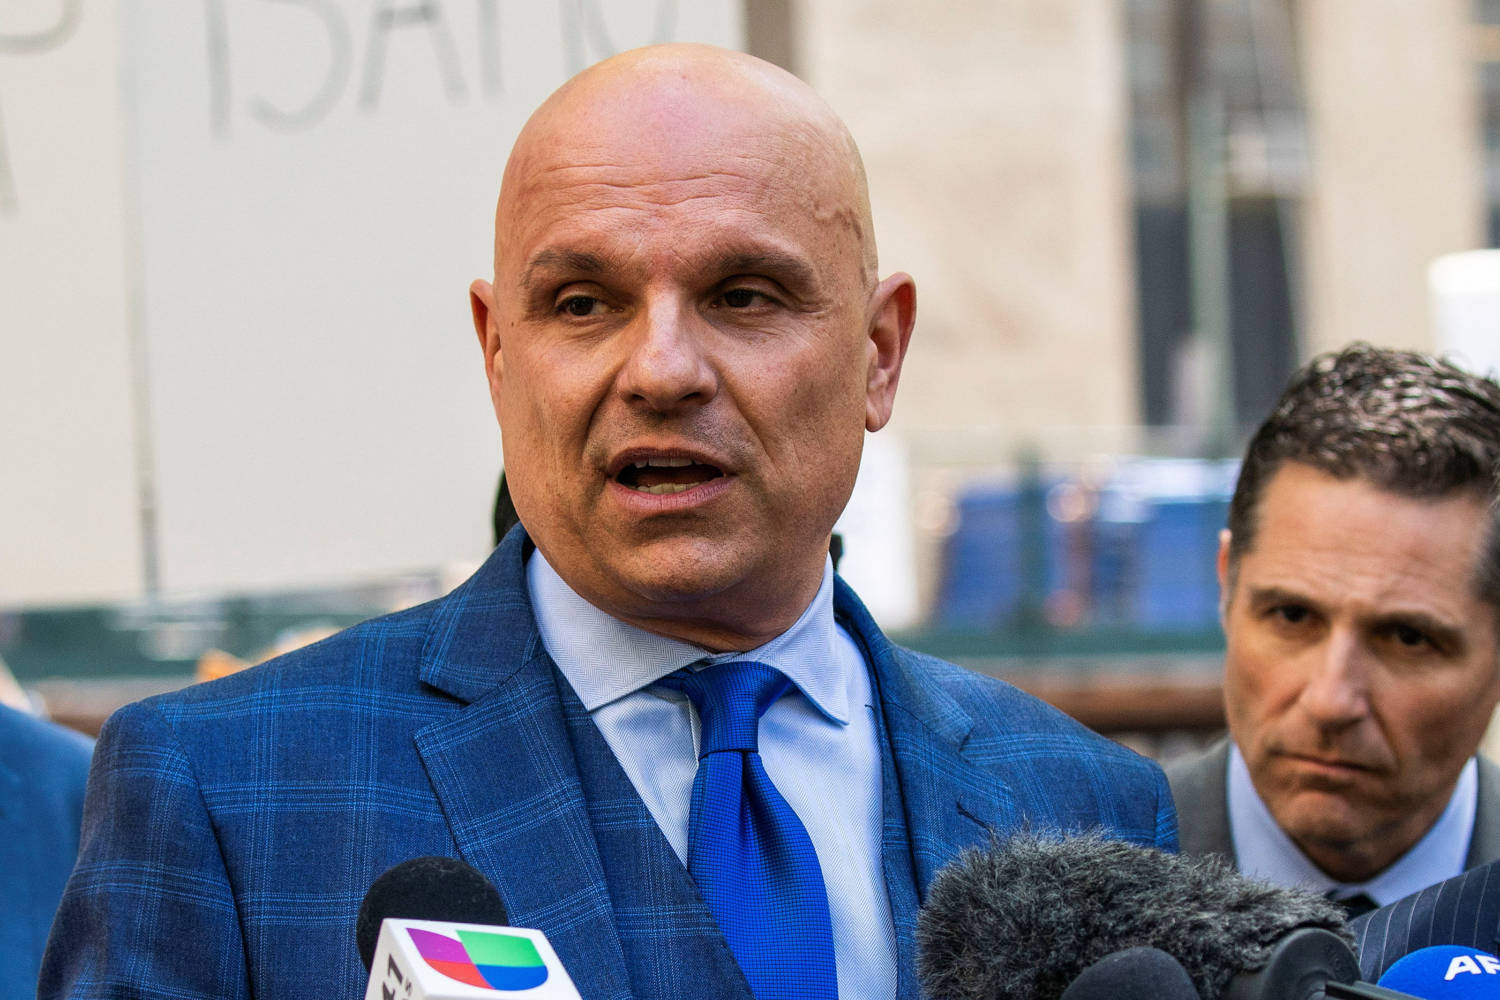 Arthur Aidala, Attorney Of Harvey Weinstein, Speaks During A Press Conference At Collect Pond Park Near Manhattan Criminal Court In New York City